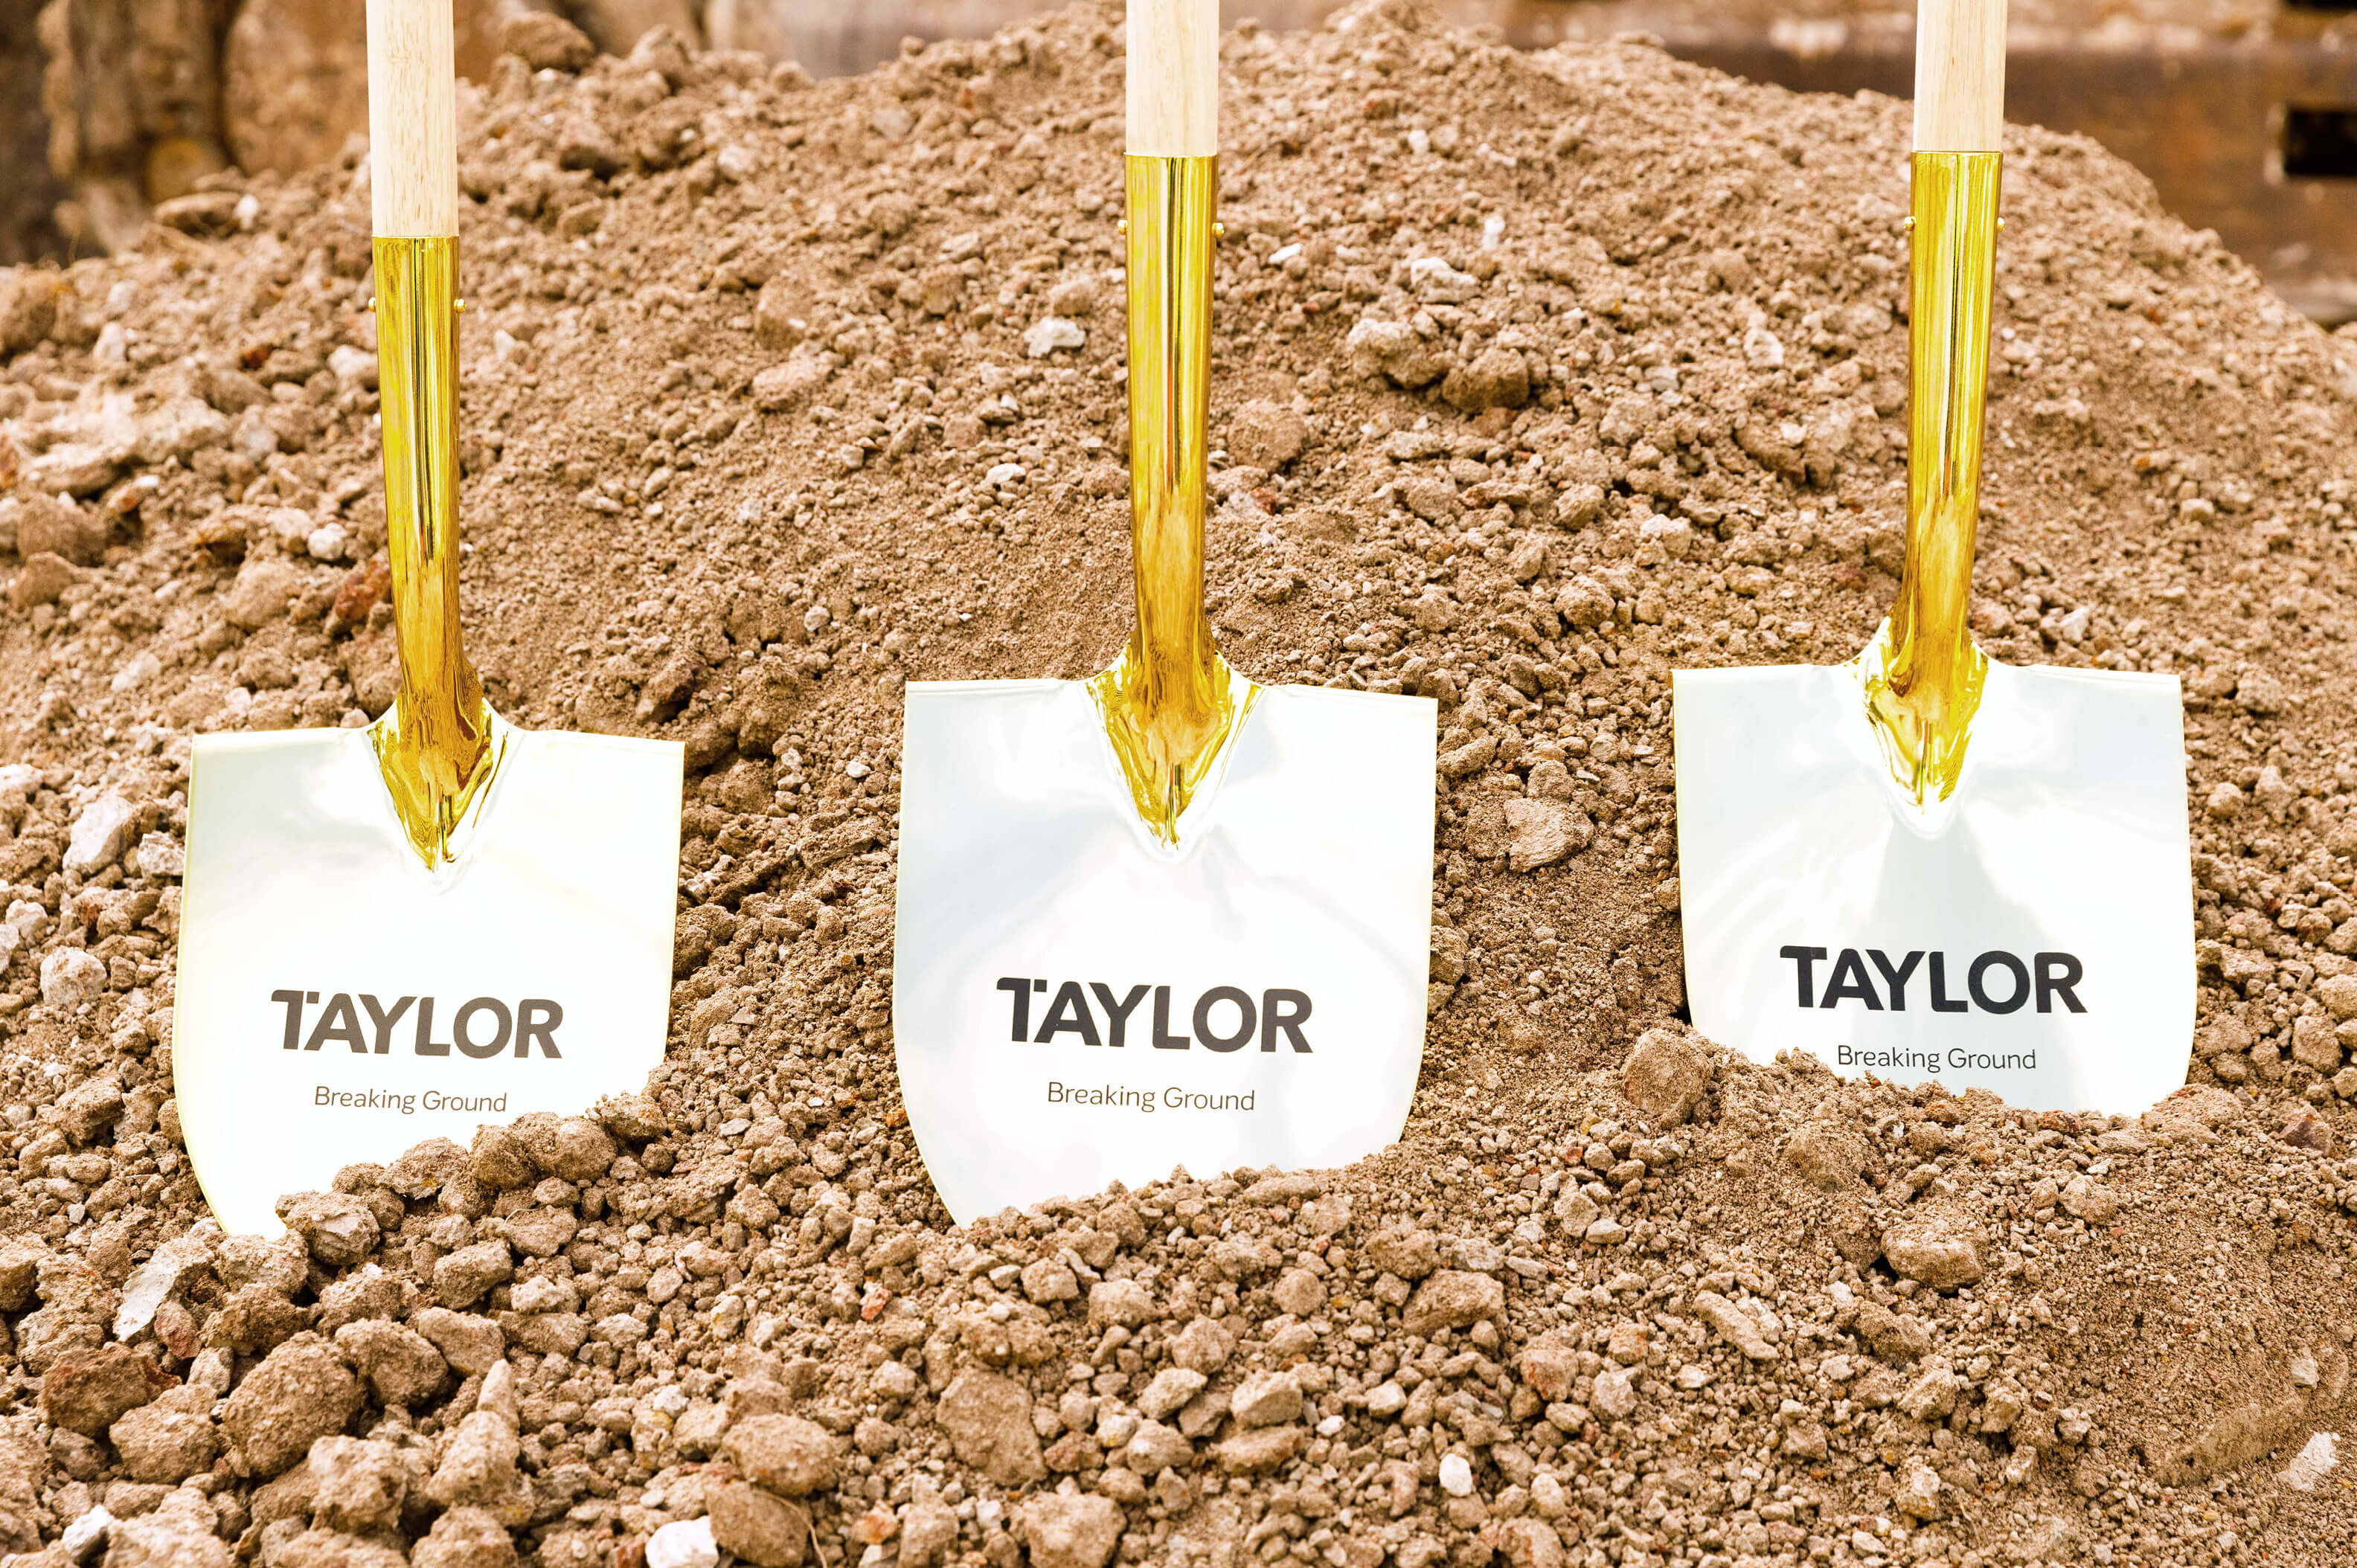 03 close up of taylor shovels in soil for breaking ground taylor news article breaking ground alongside nsw land